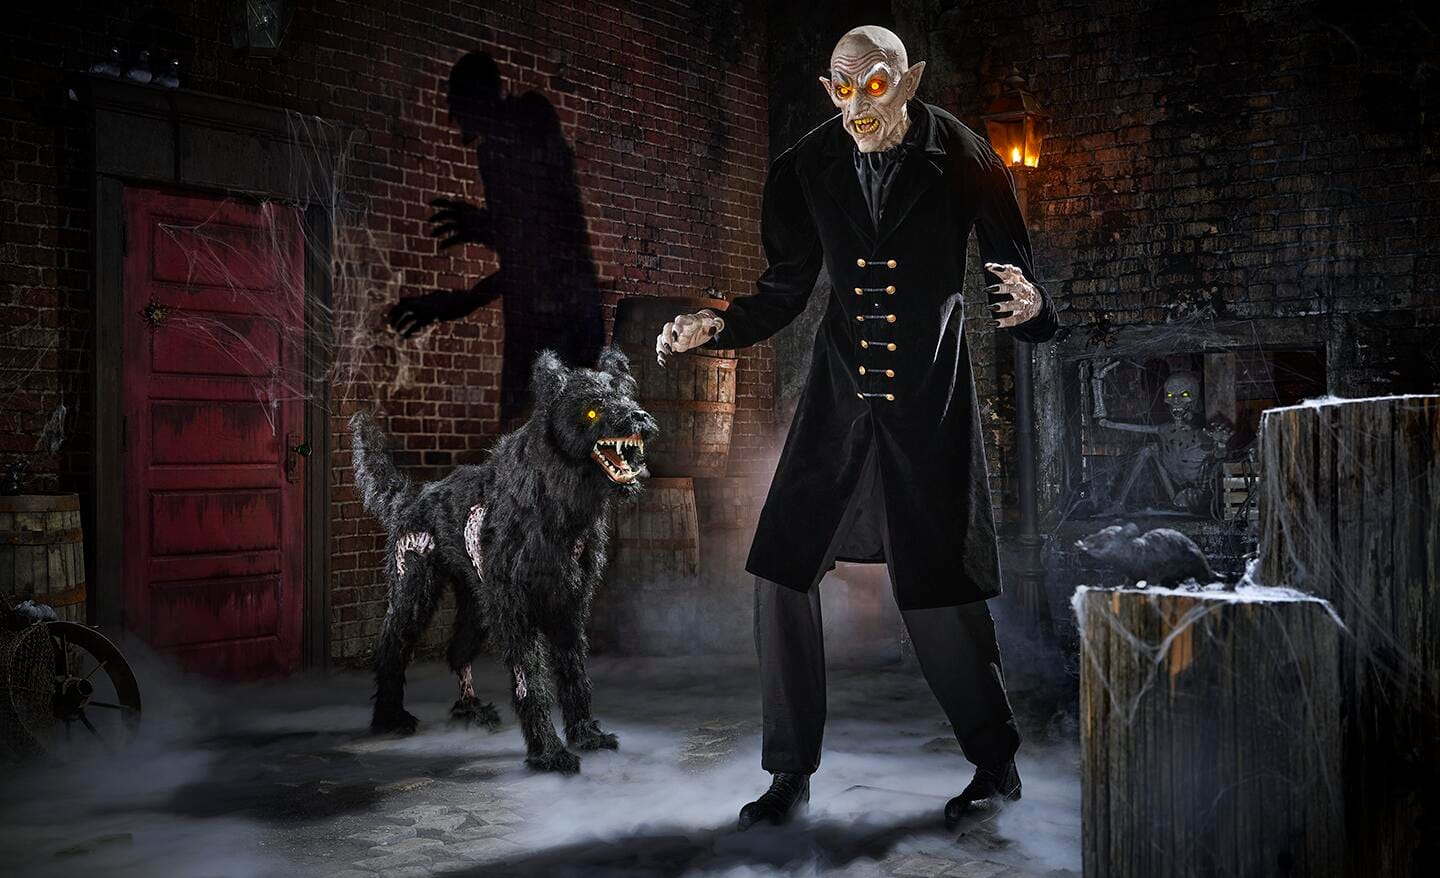 An animatronic vampire with eyes that glow stands in the center of a scary scene in a courtyard decorated for Halloween. 